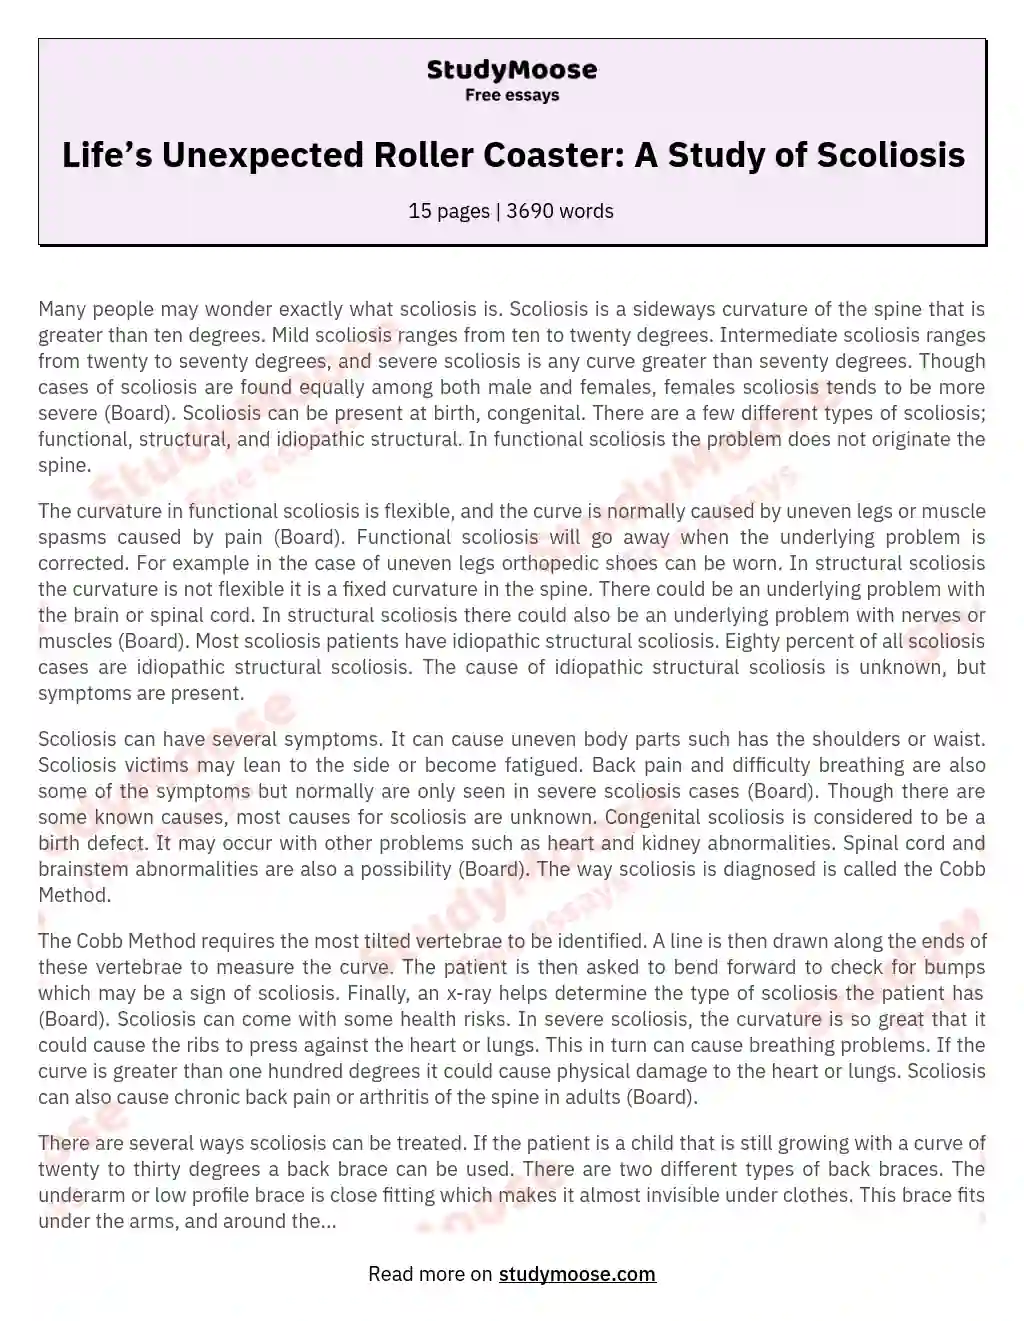 Life’s Unexpected Roller Coaster: A Study of Scoliosis essay